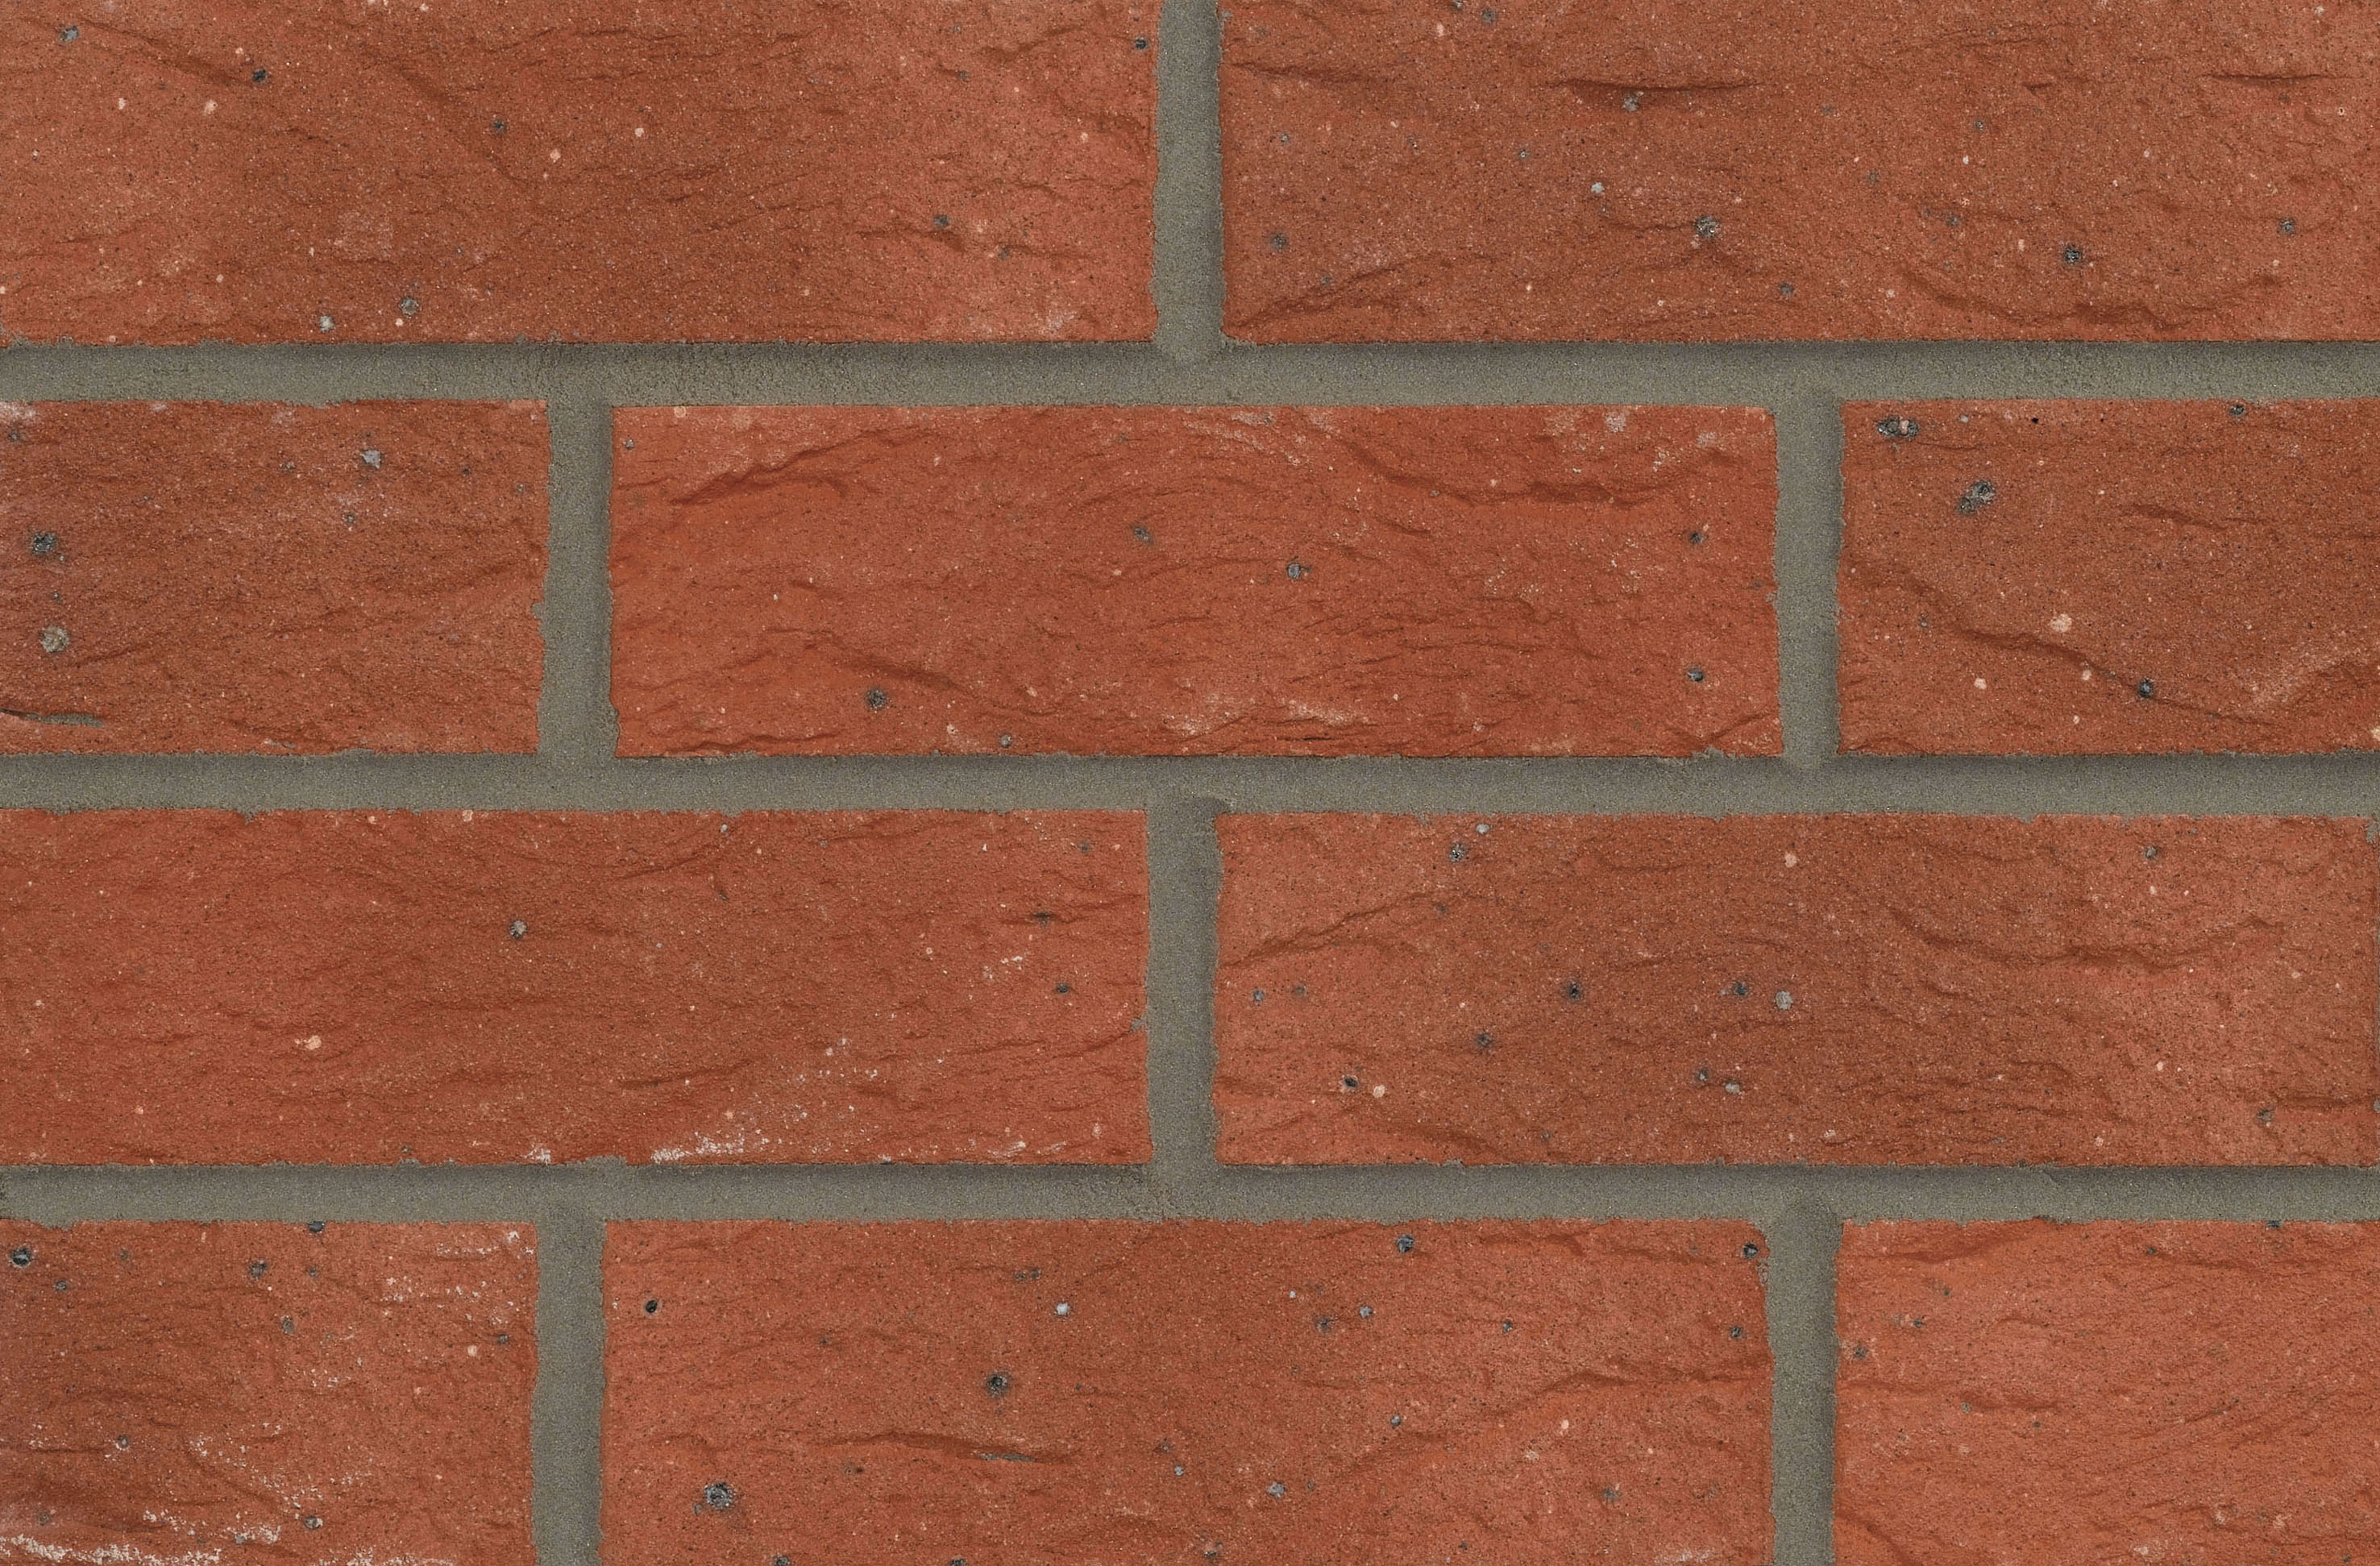 File:Red brick wall texture.JPG - Wikimedia Commons